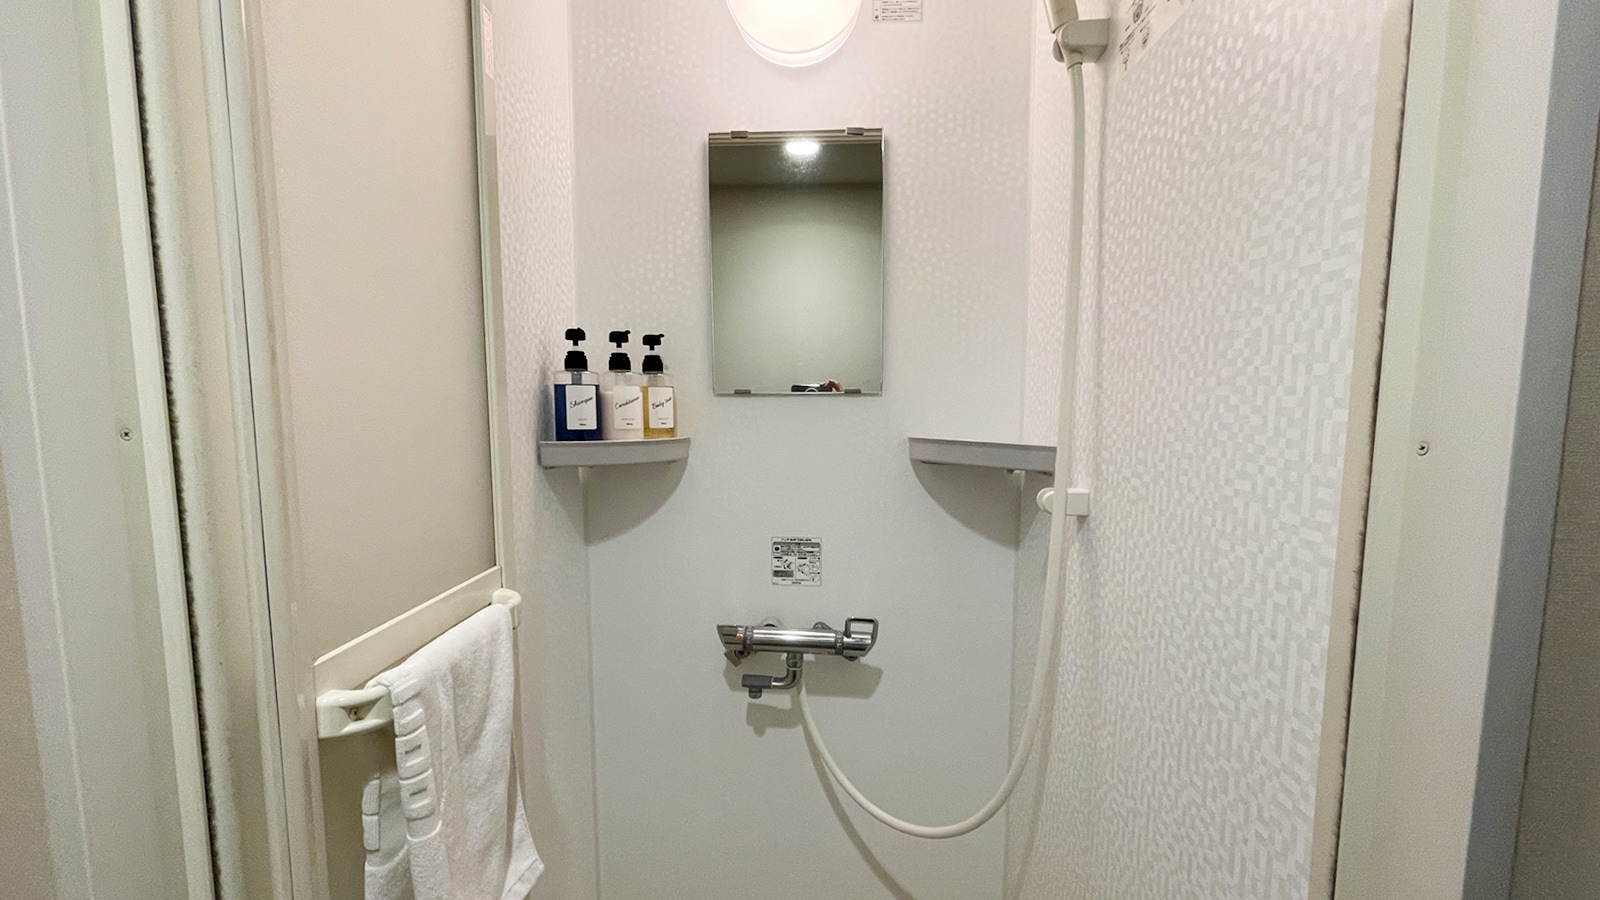 ■ Guest room shower booth